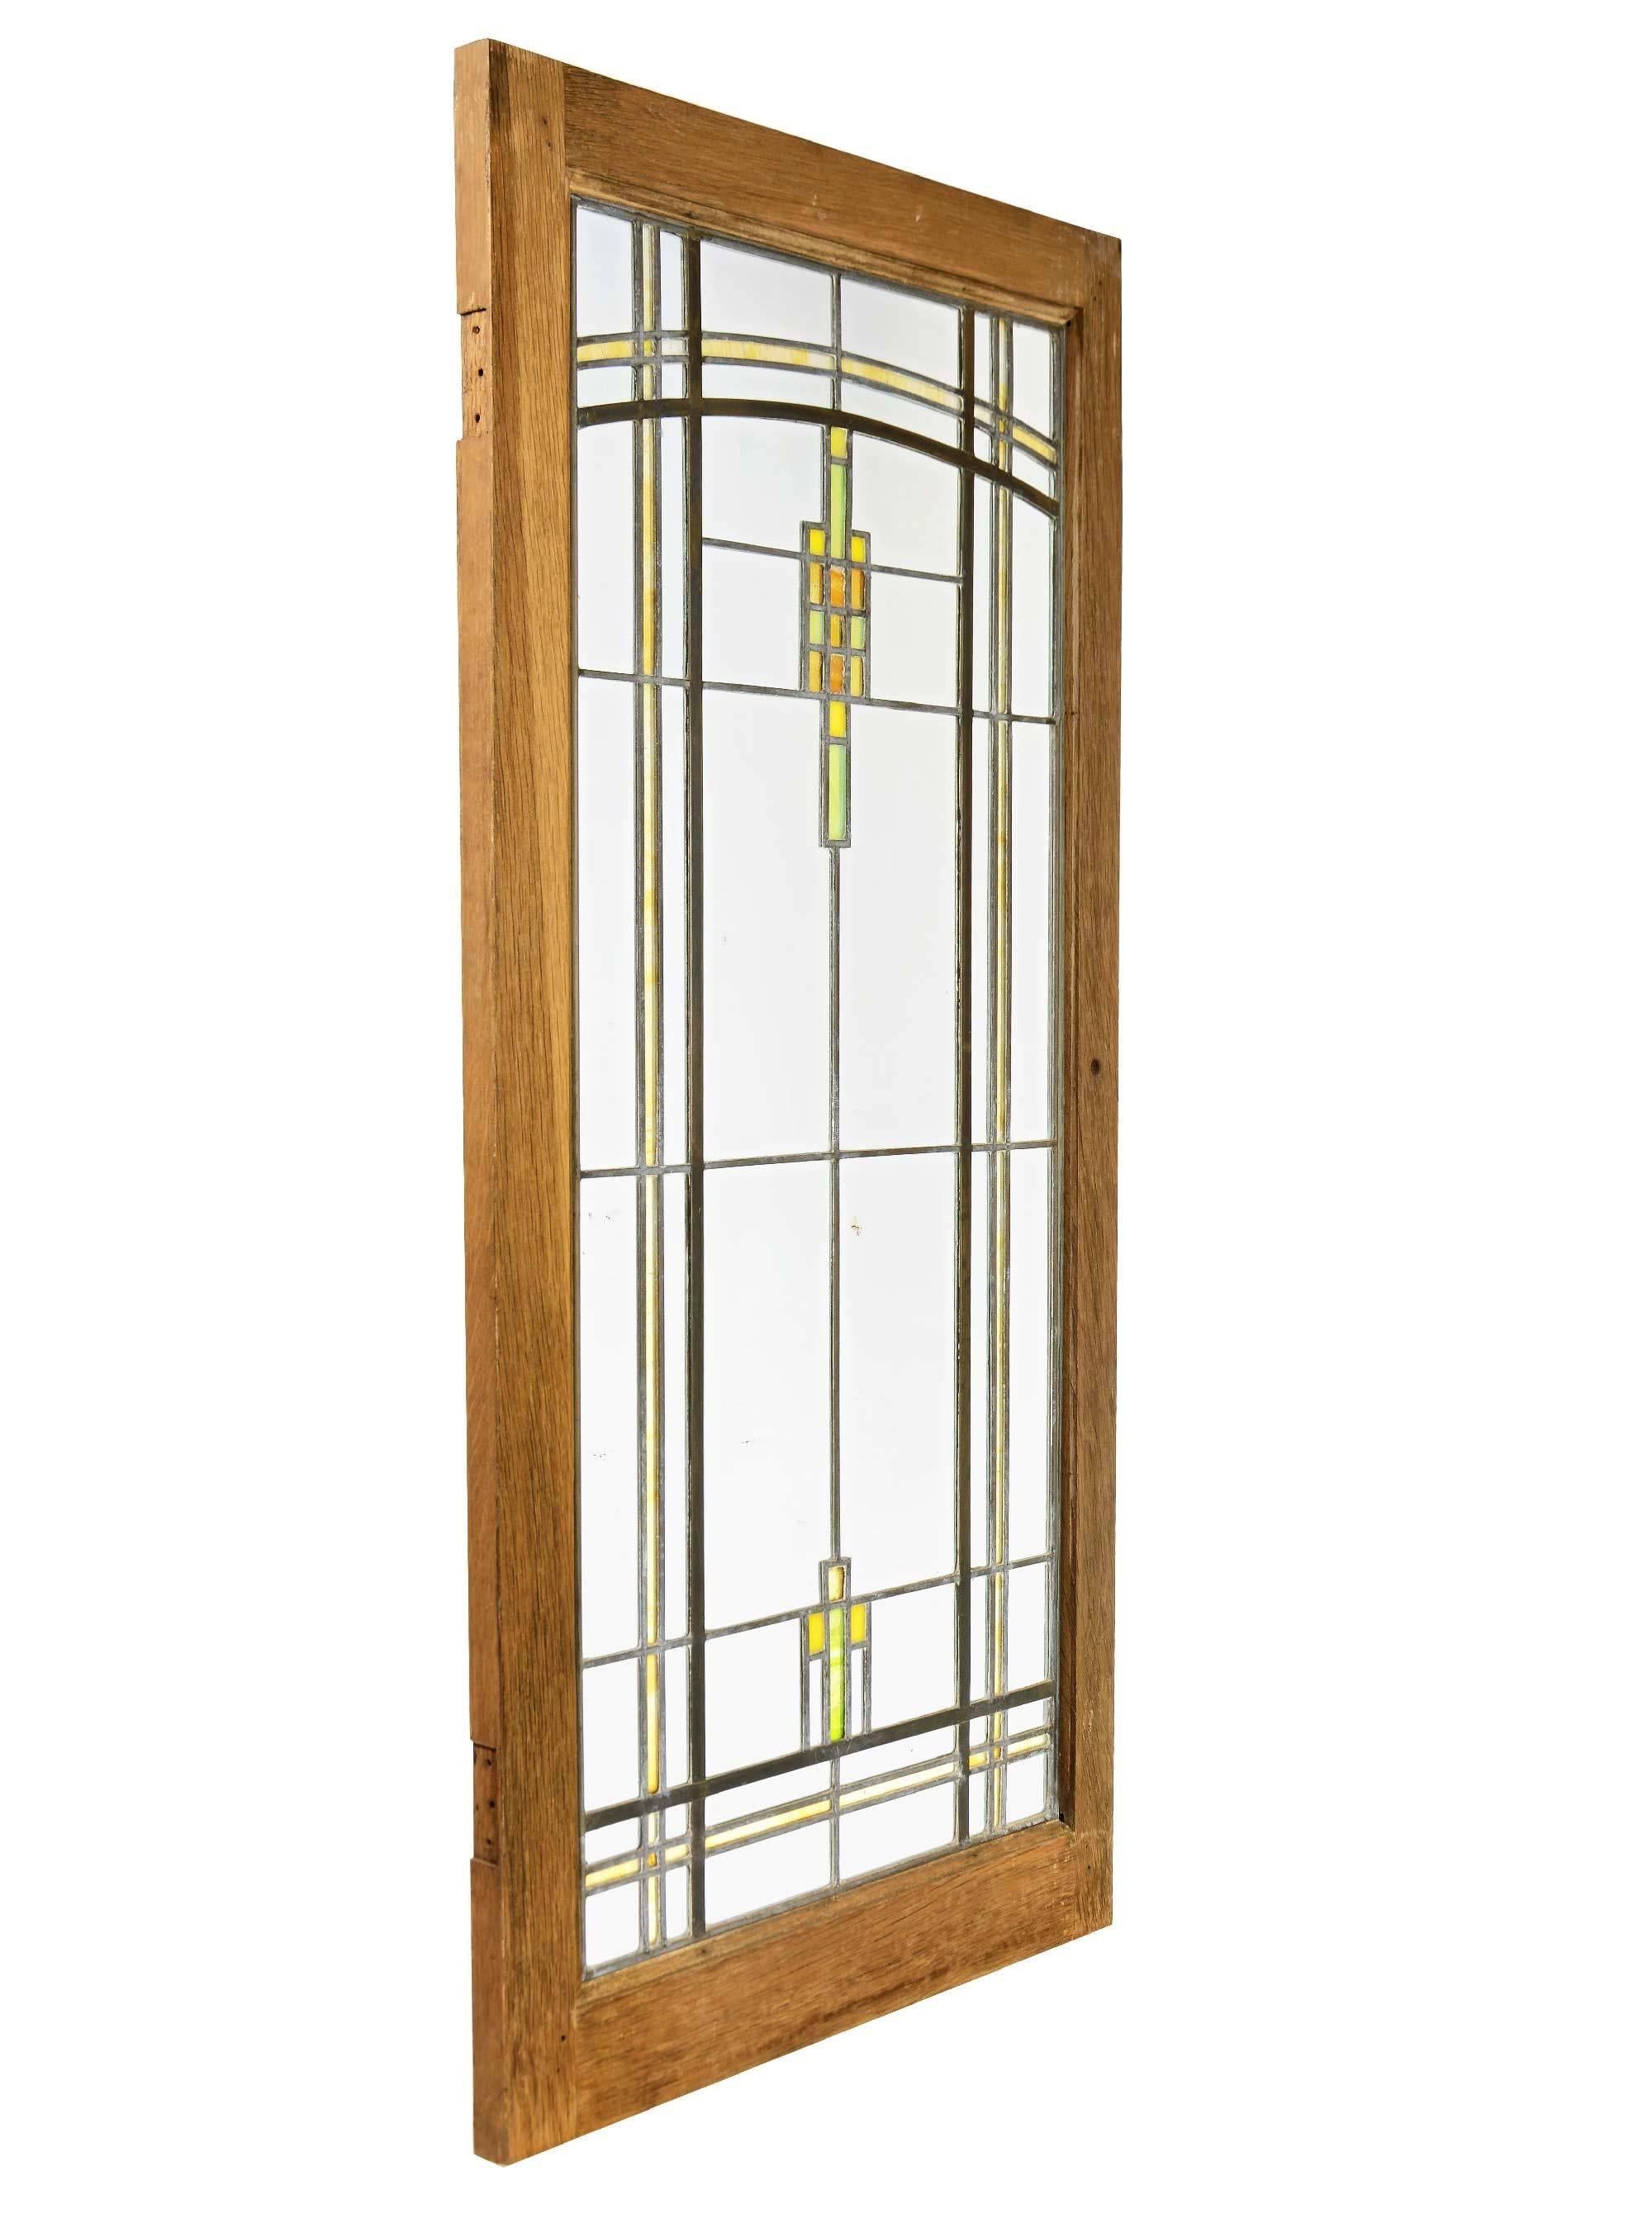 These stunning leaded glass prairie windows feature stylized flowers of yellow, orange and green stained glass. Designed by prominent Prairie School architect George Grant Elmslie.

Finish: Original.
  